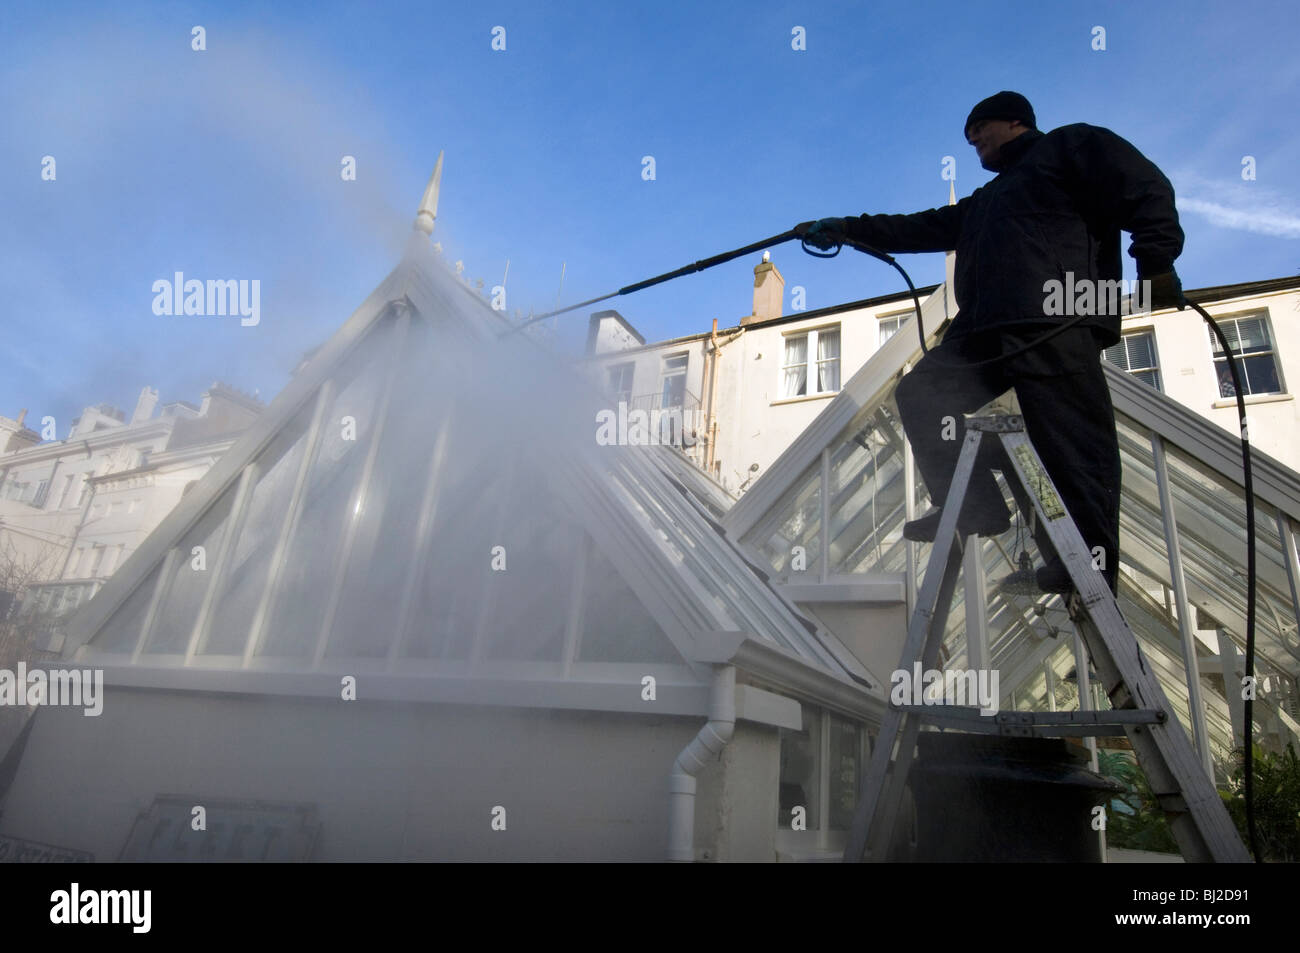 A man power-washing a greenhouse with a jet spray. Stock Photo